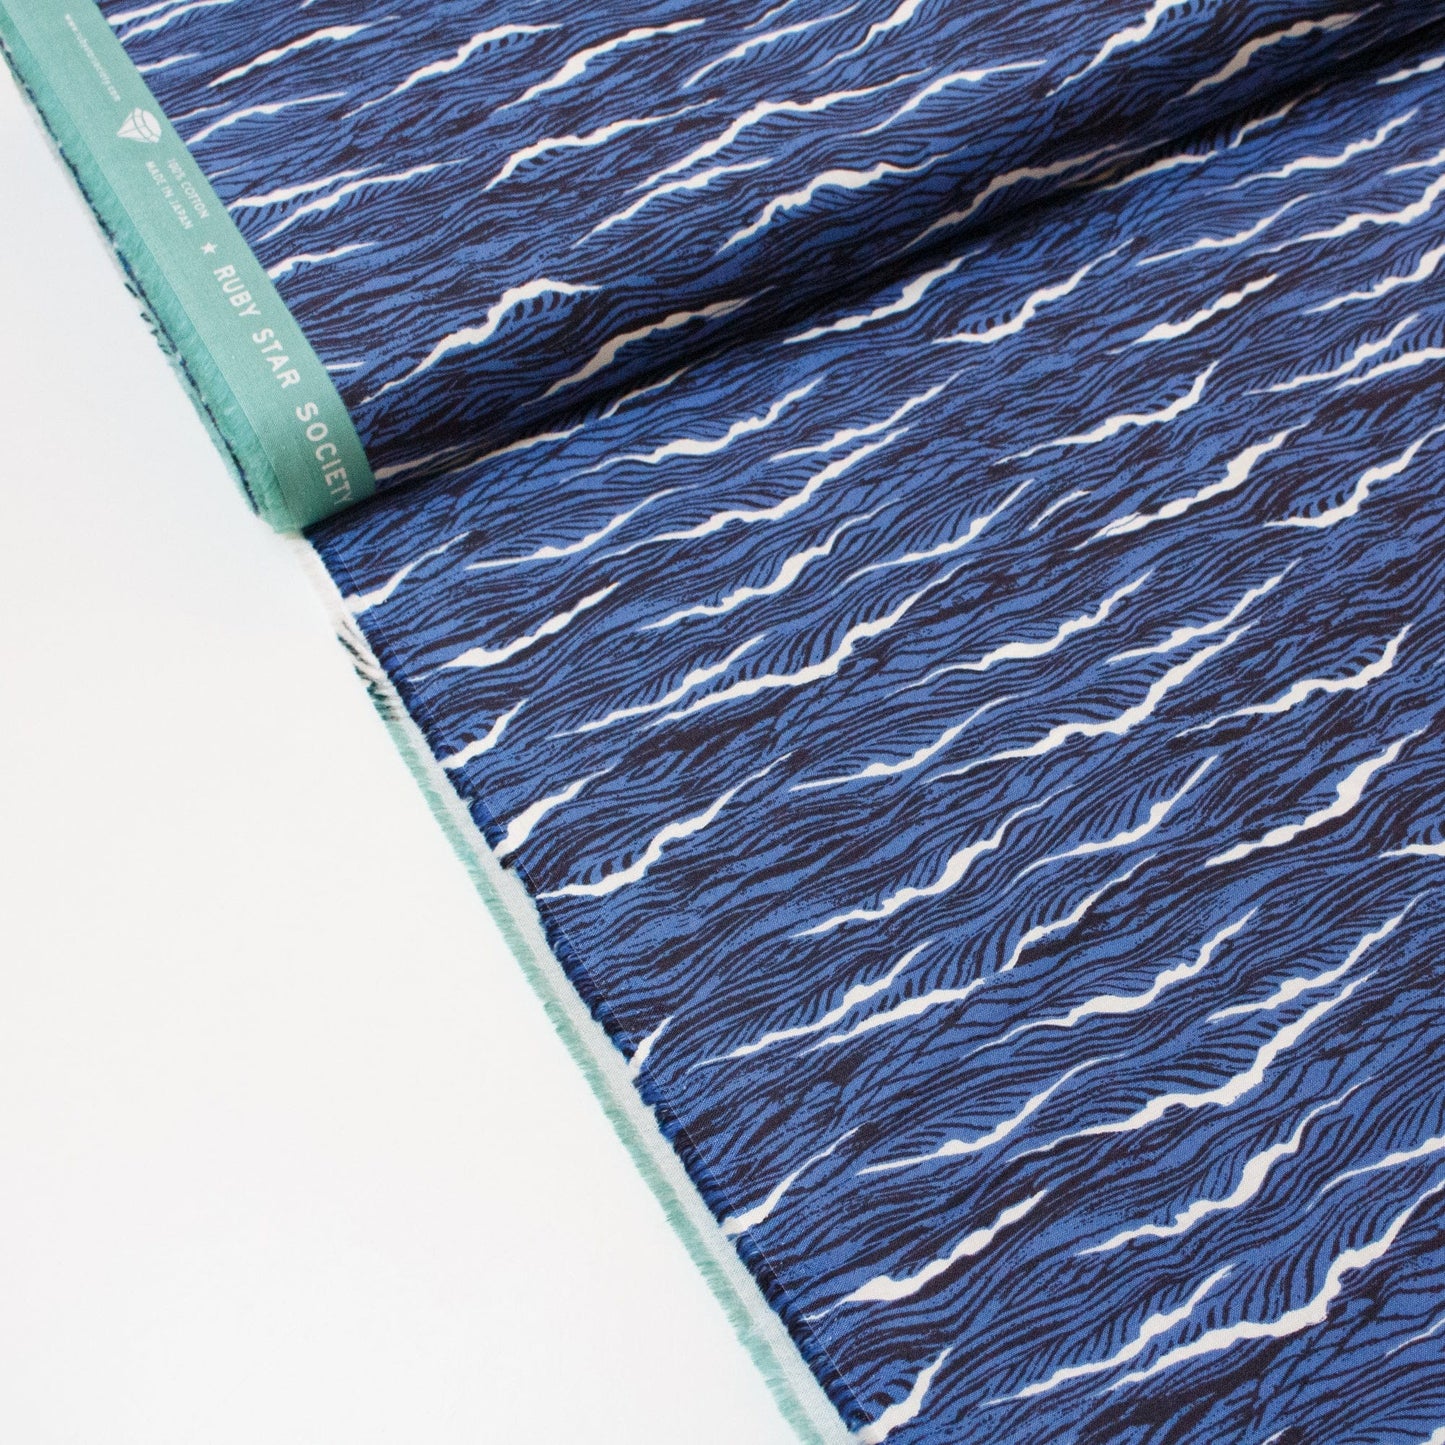 Ruby Star Society 'Florida 2' Quilting Cotton 'Briny' in Twilight